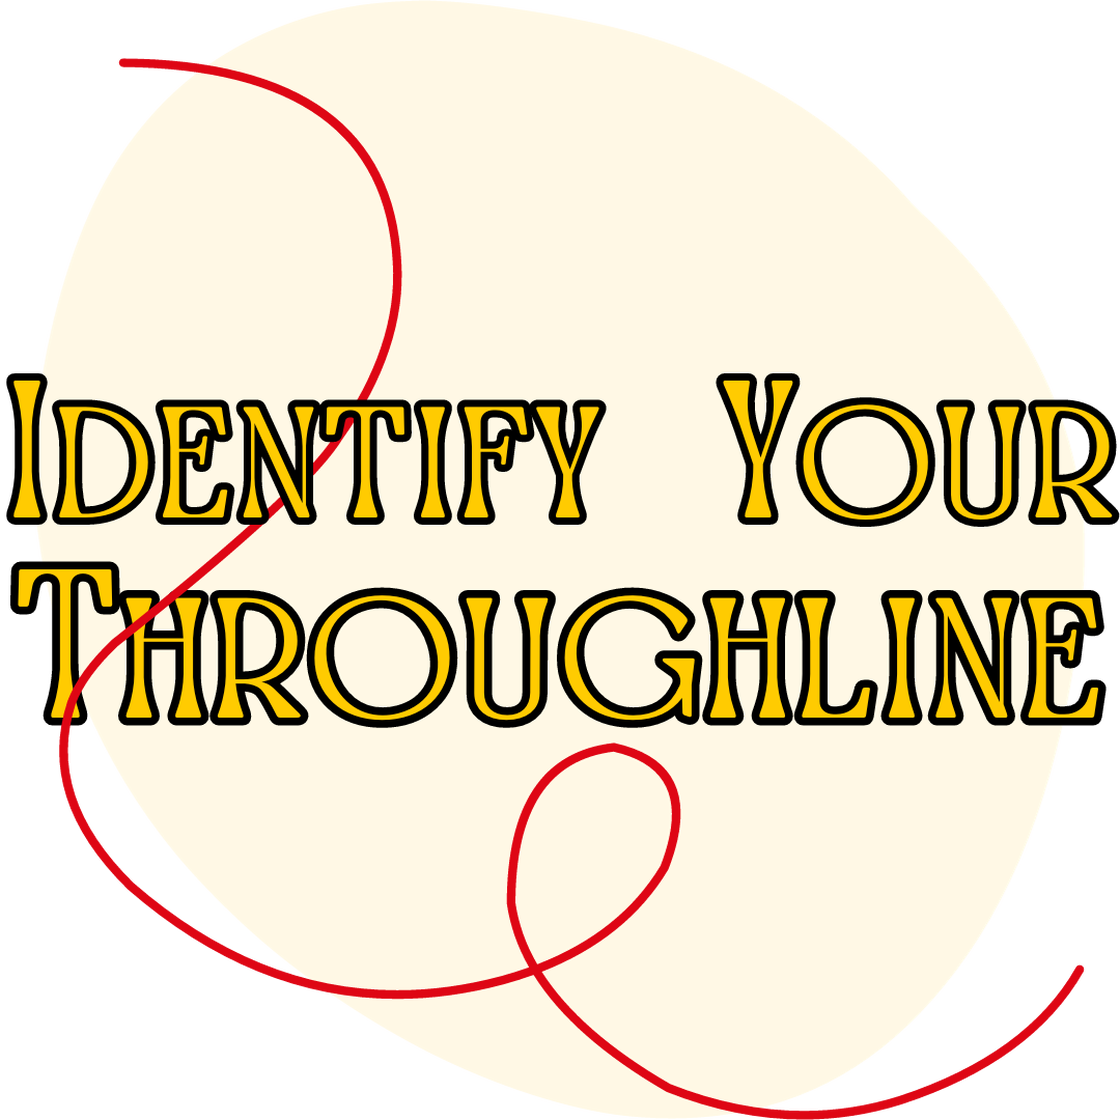 Purpose: Identify Your Throughline: Take charge of your life by identifying how what you do reflects who you are.